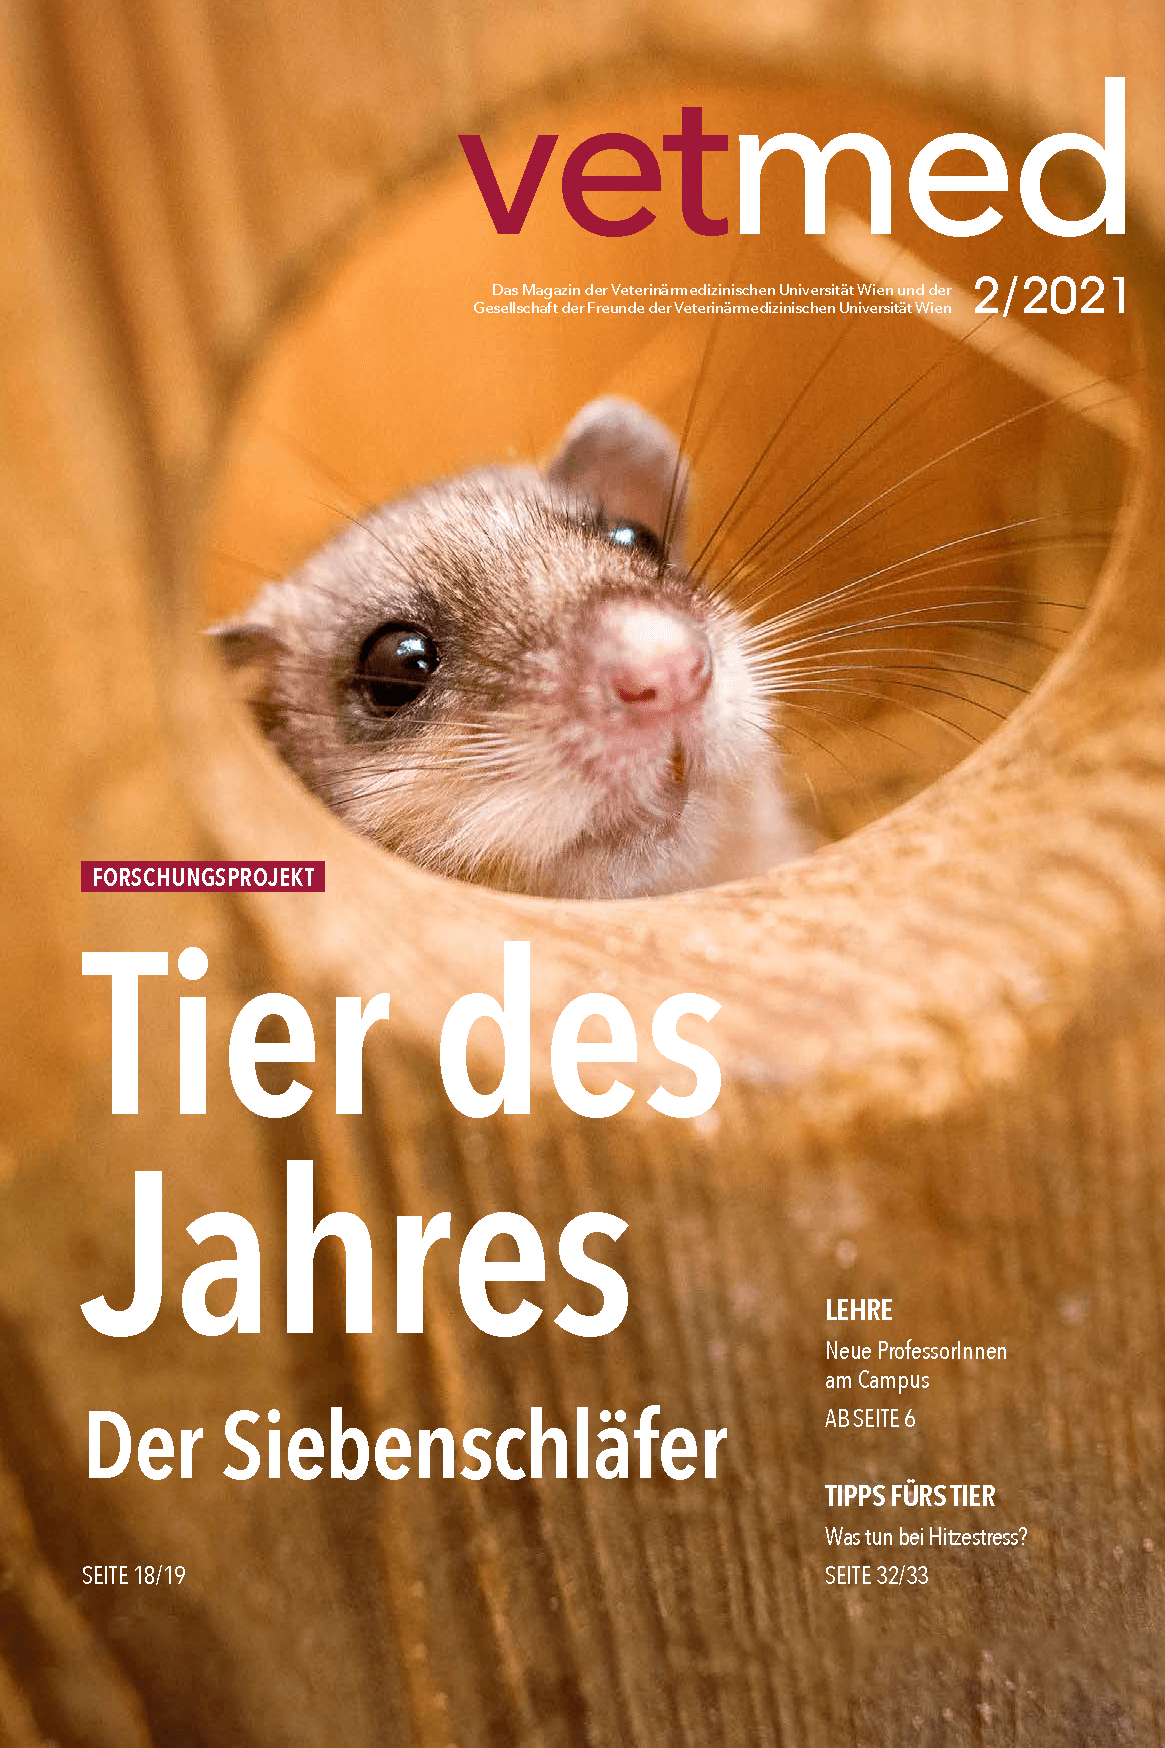 Cover of the Vetmeduni Magazine with a dormouse